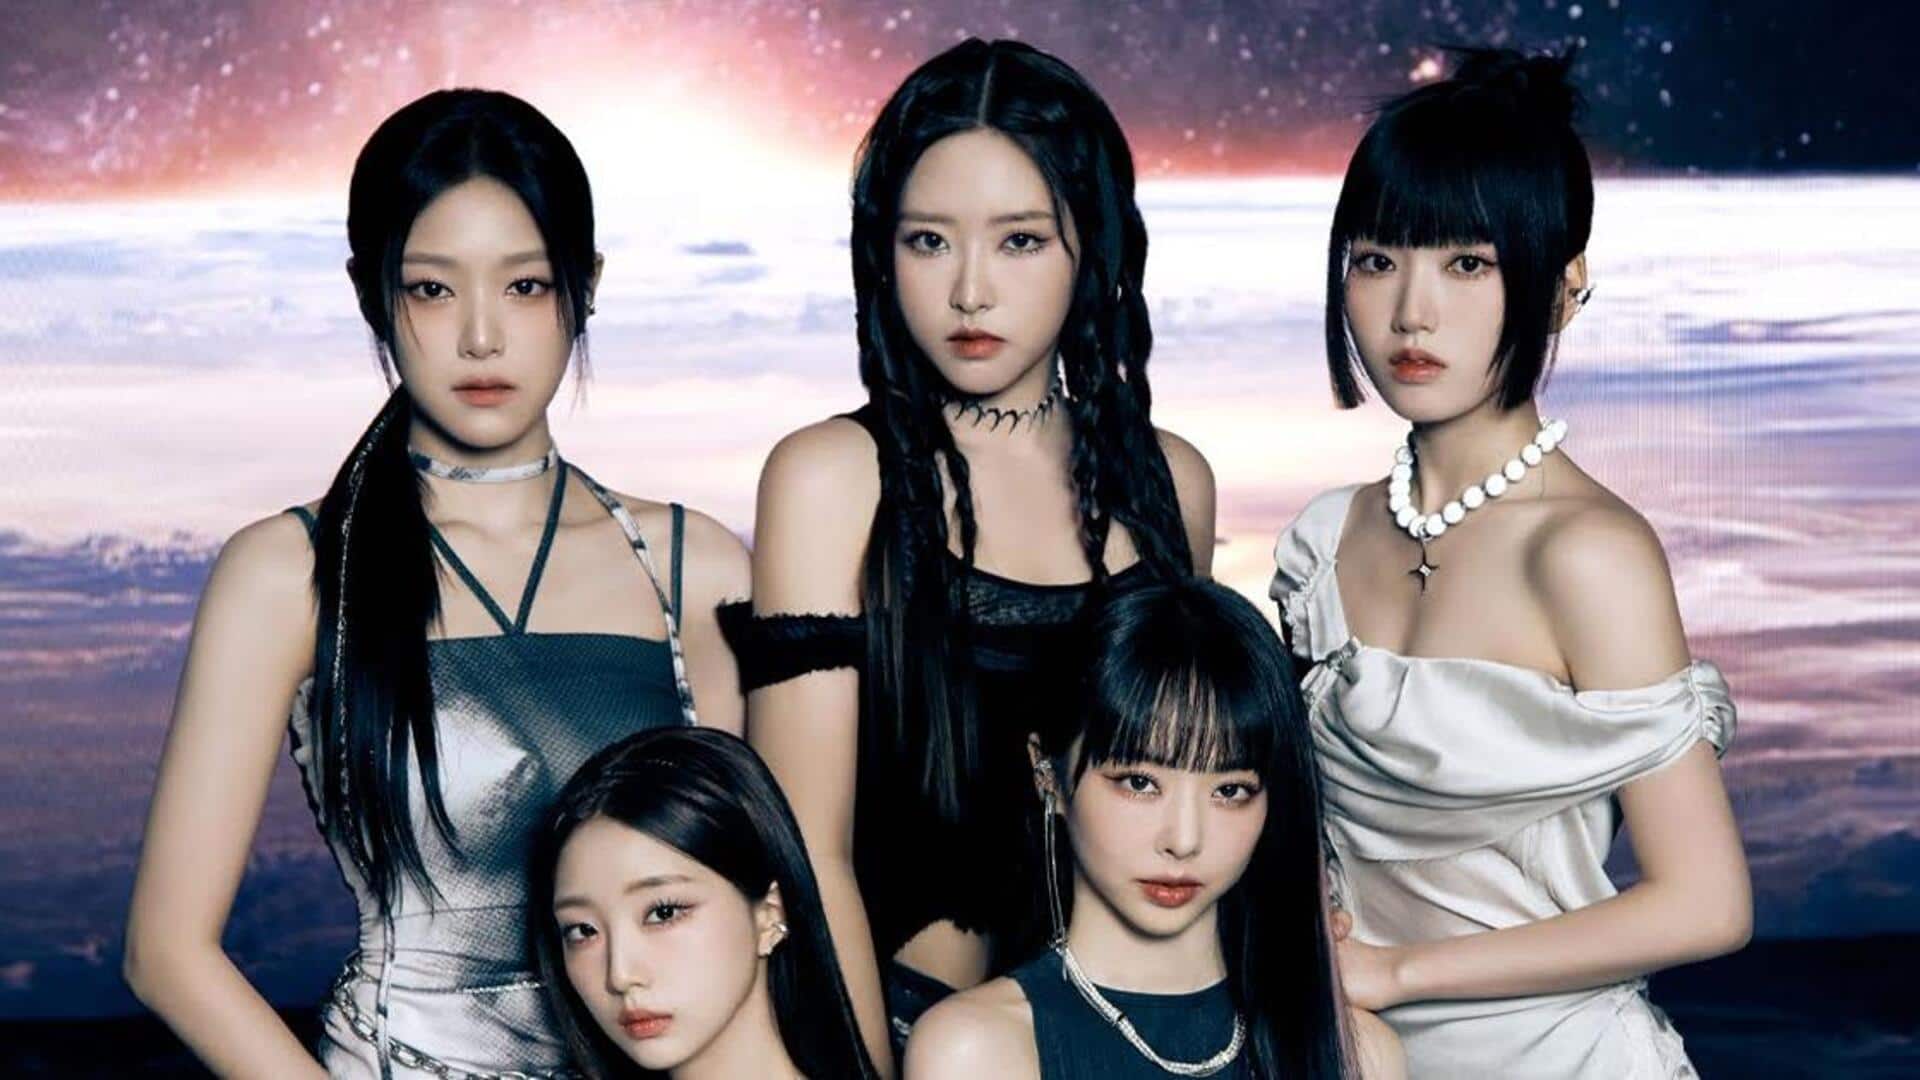 LOOSSEMBLE wins lawsuit against BlockBerry Creative; girl-group to retain name